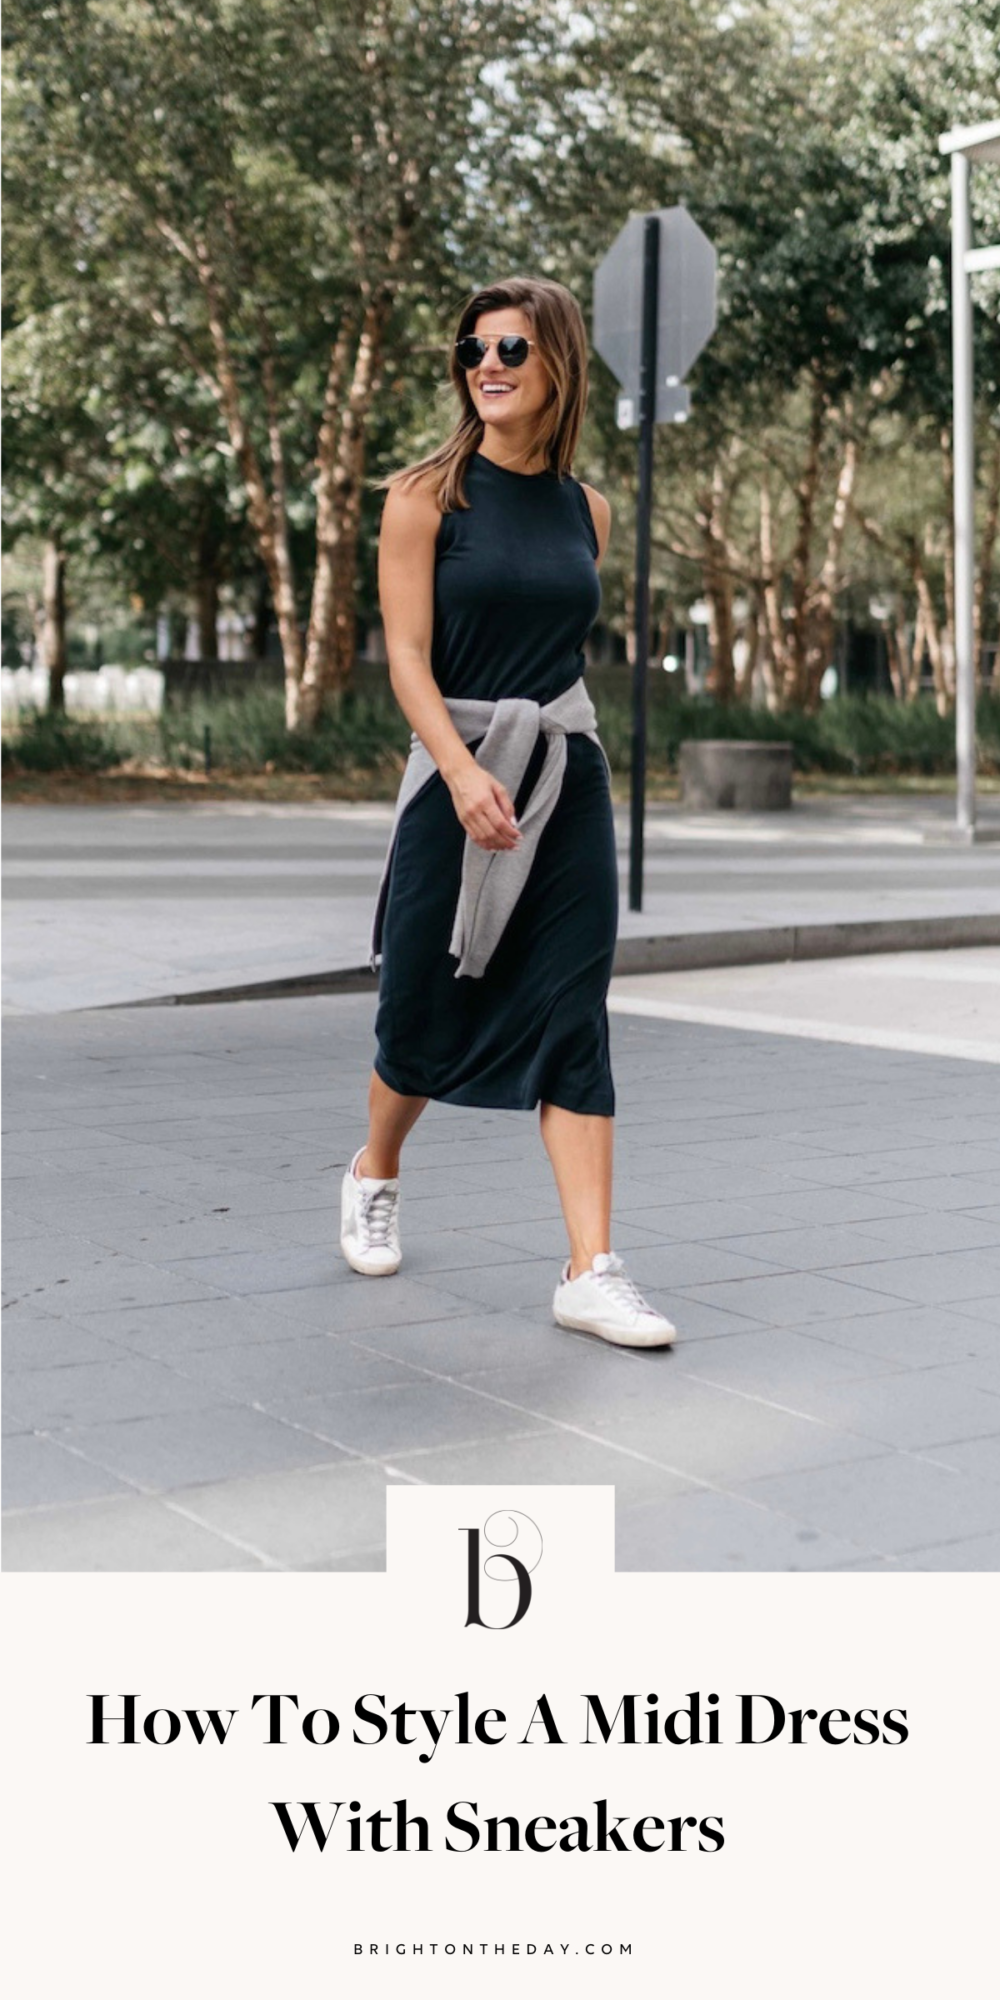 How To Style A Midi Dress With Sneakers 